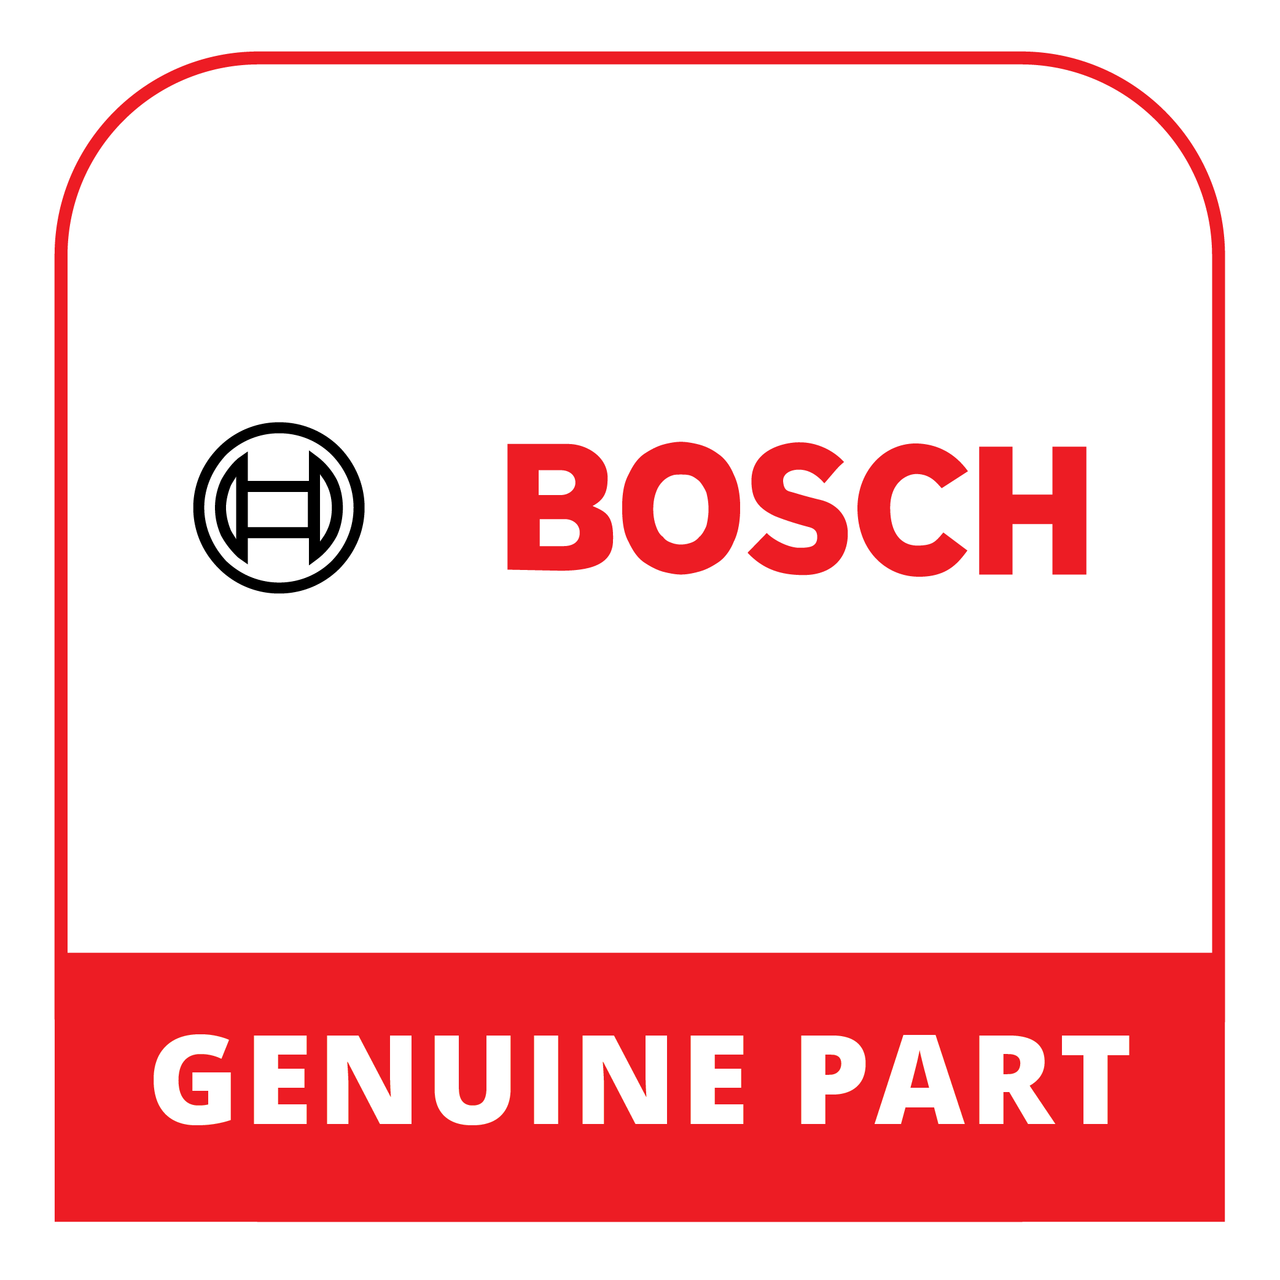 Bosch (Thermador) 10015928 - Clamping Piece - Genuine Bosch (Thermador) Part